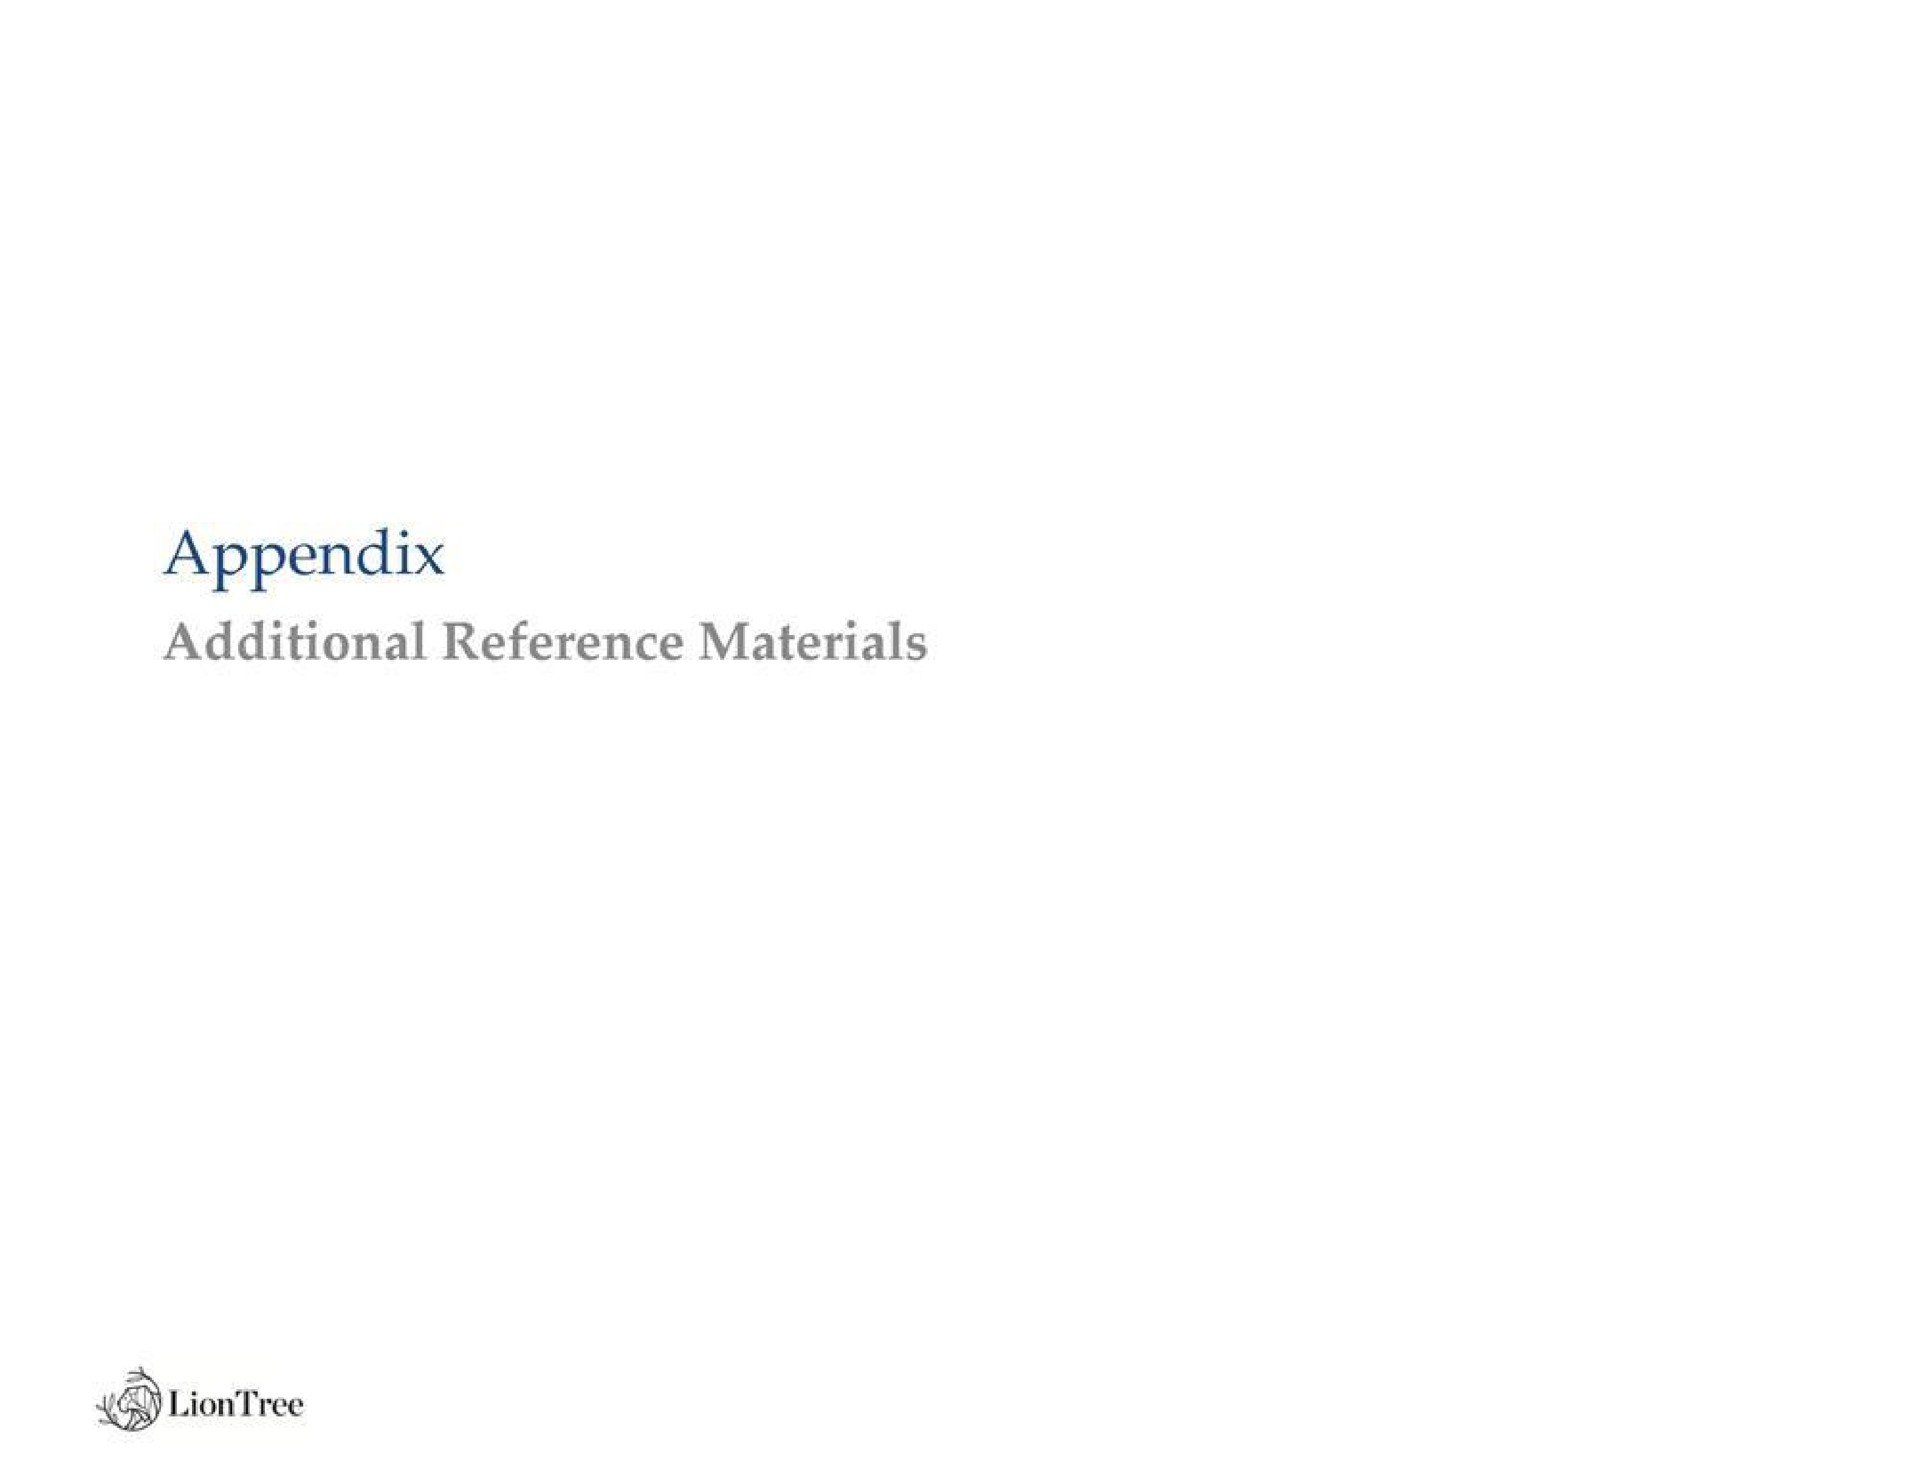 appendix additional reference materials | LionTree